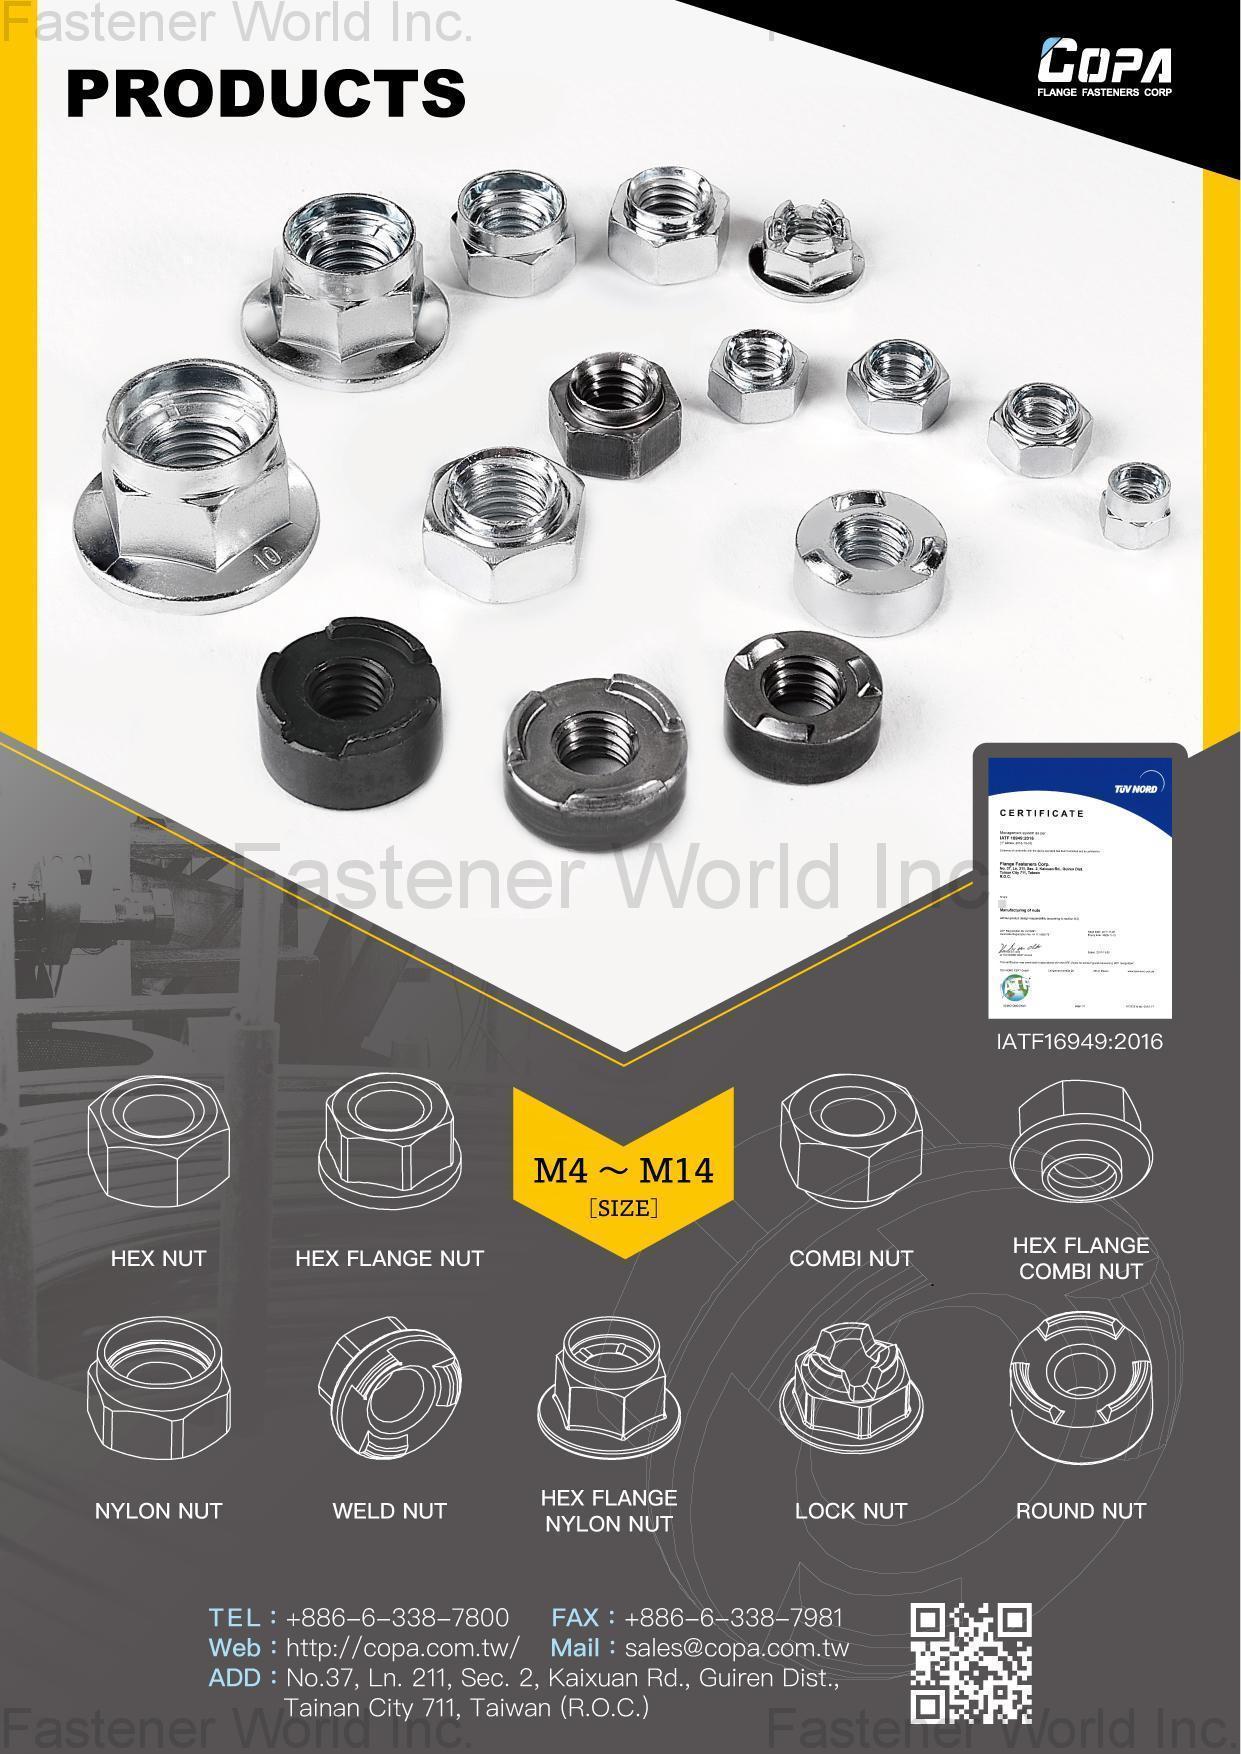 COPA FLANGE FASTENERS CORP. , Hex Flange Nuts, Combi Nuts, Nylon Nuts, Weld Nuts, Lock Nuts, Hex Flange Nylon Nuts, Round Nuts, Hex Flange Combi Nuts, Special Nuts , All Kinds Of Nuts